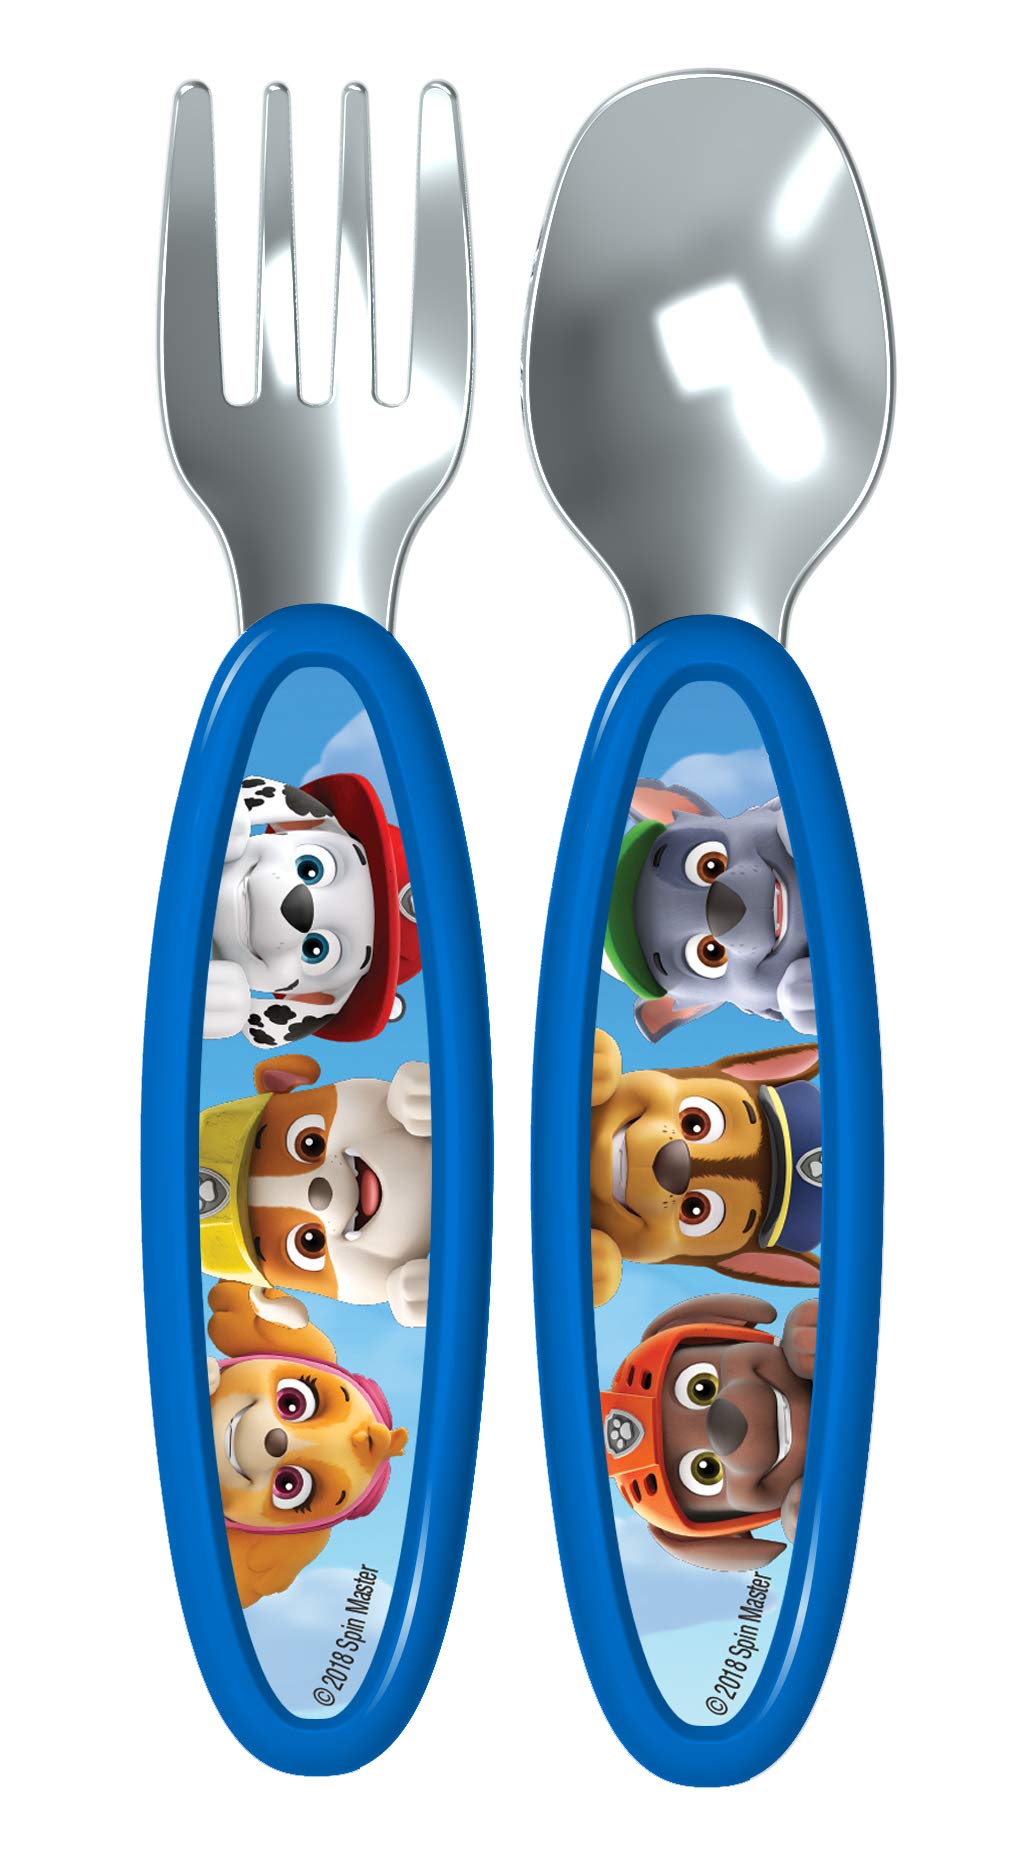 Playtex Mealtime Paw Patrol Utensils for Boys Including 1 Spoon and 1 Fork(Pack of 1)